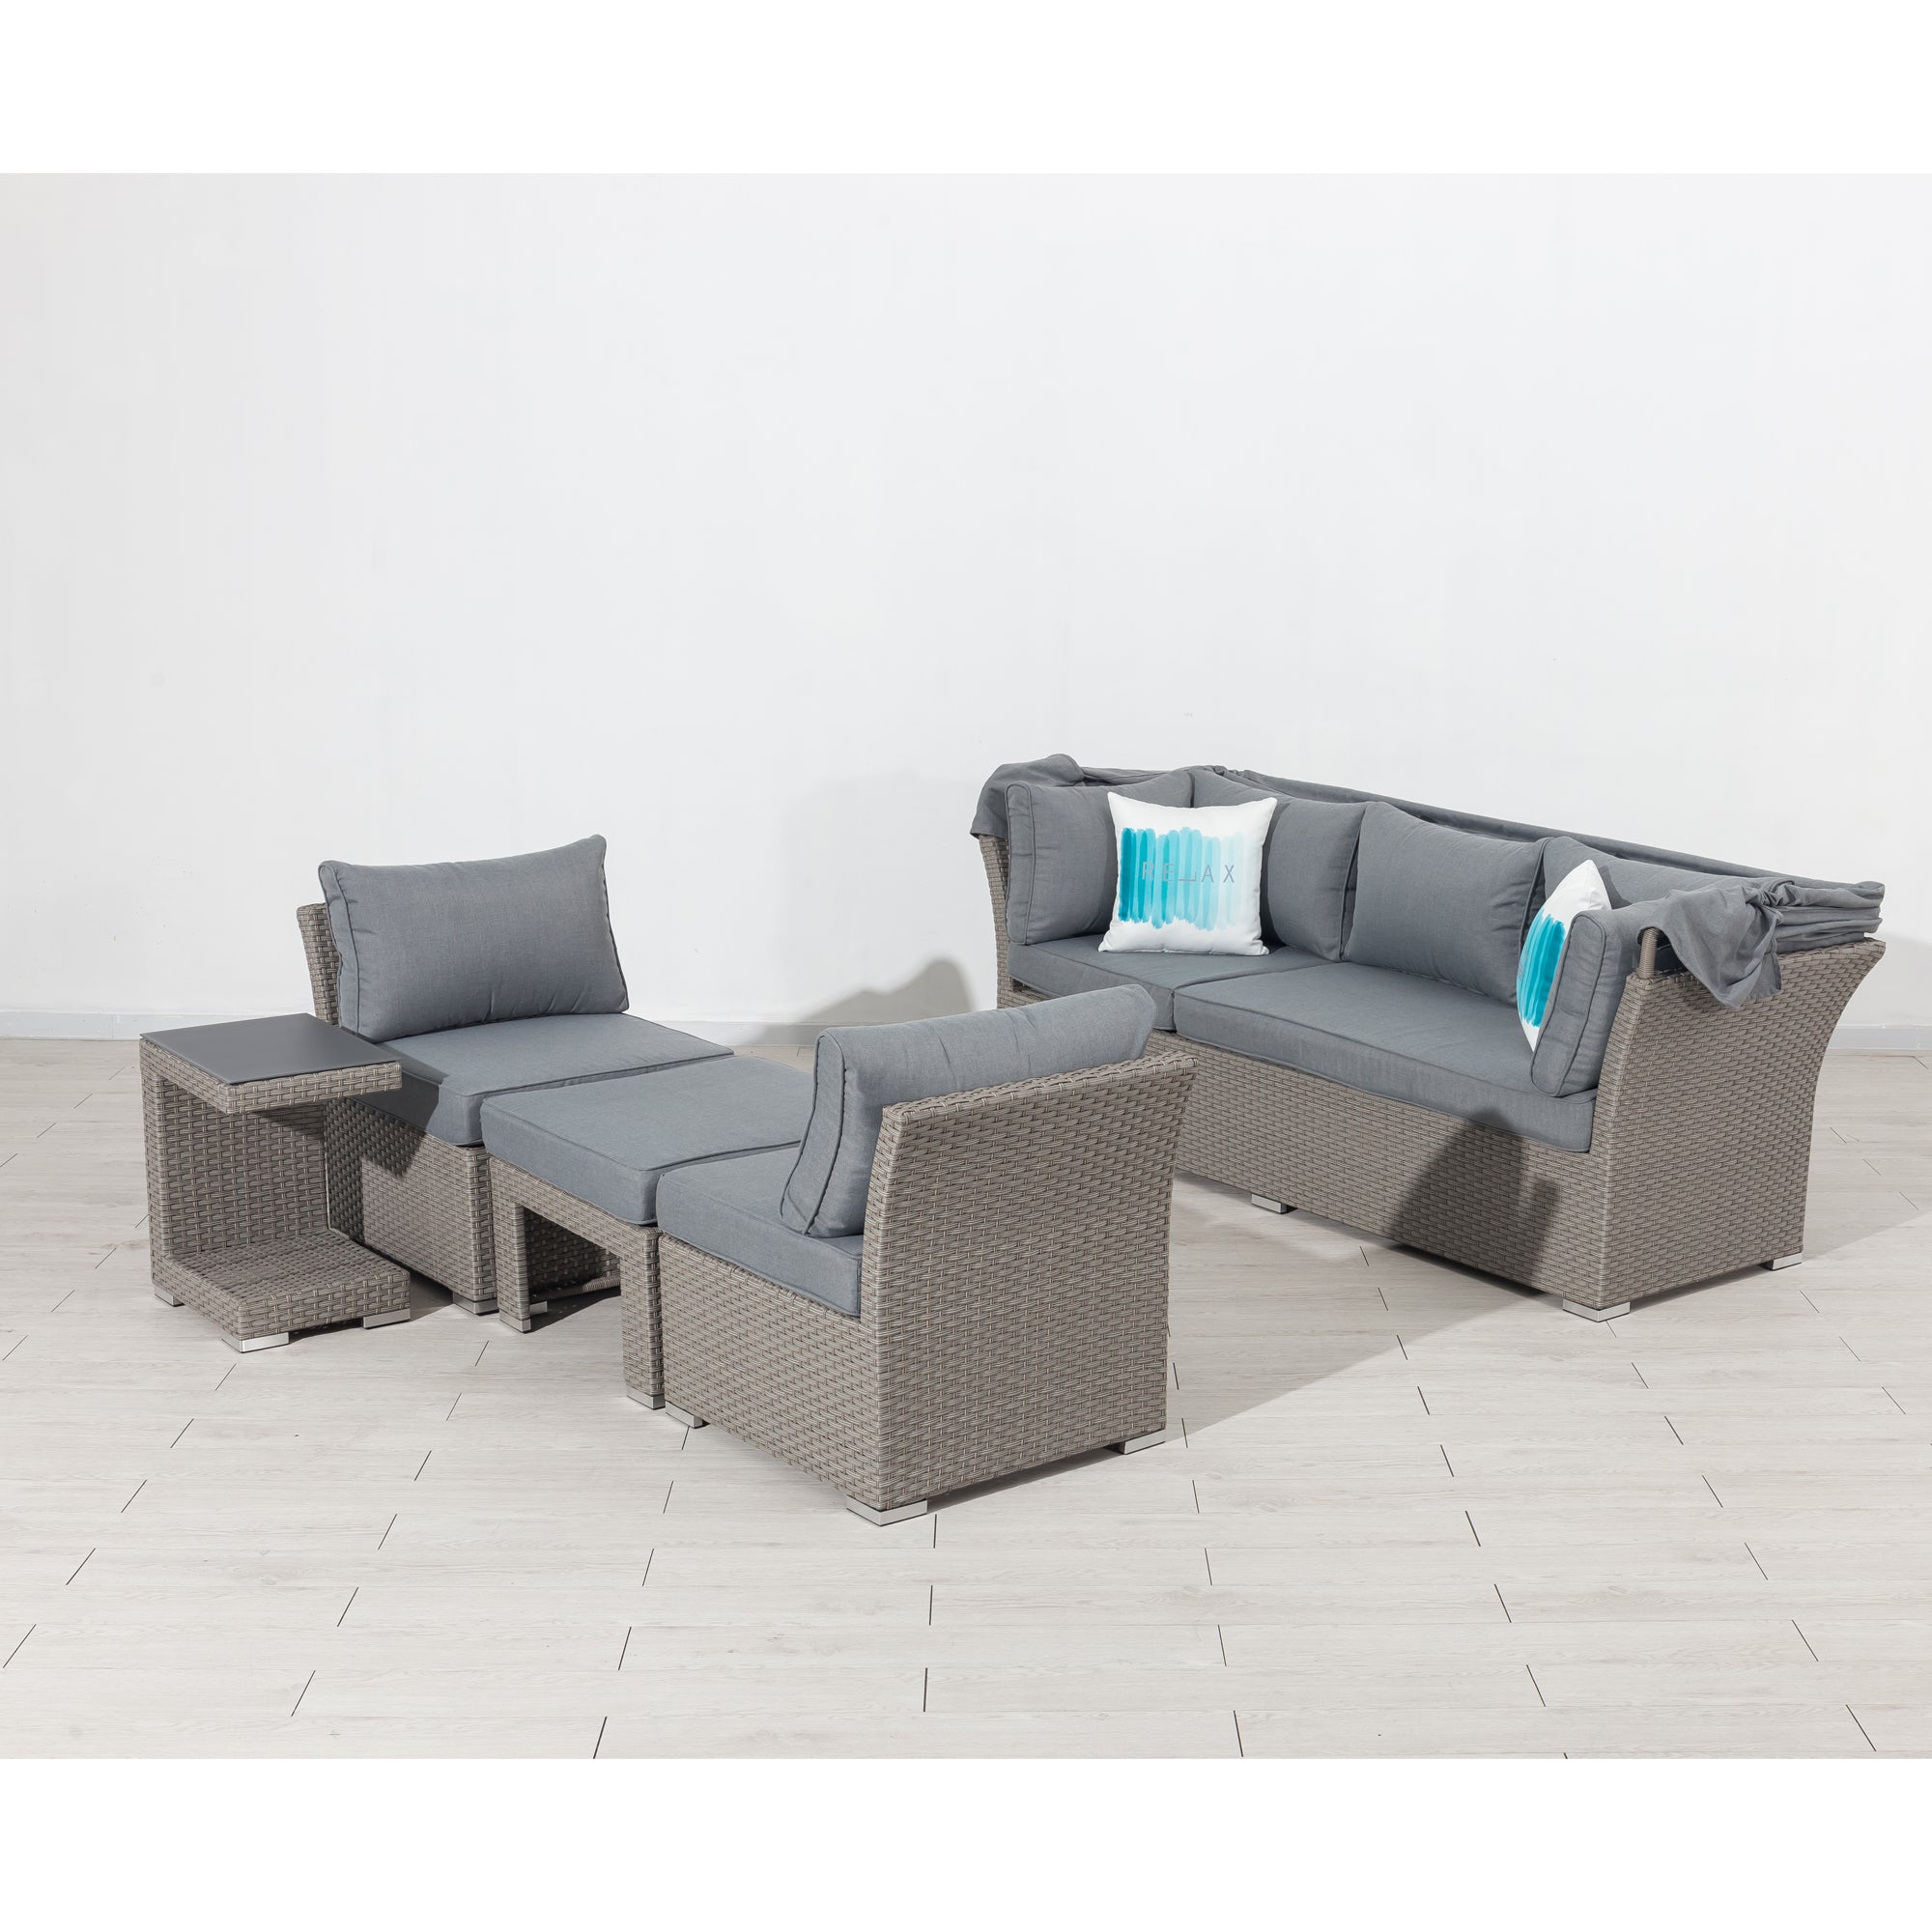 20% EXTRA sparen - Dining Lounge Set / Daybed Relax, variabel stellbar inkl. Sonnendach